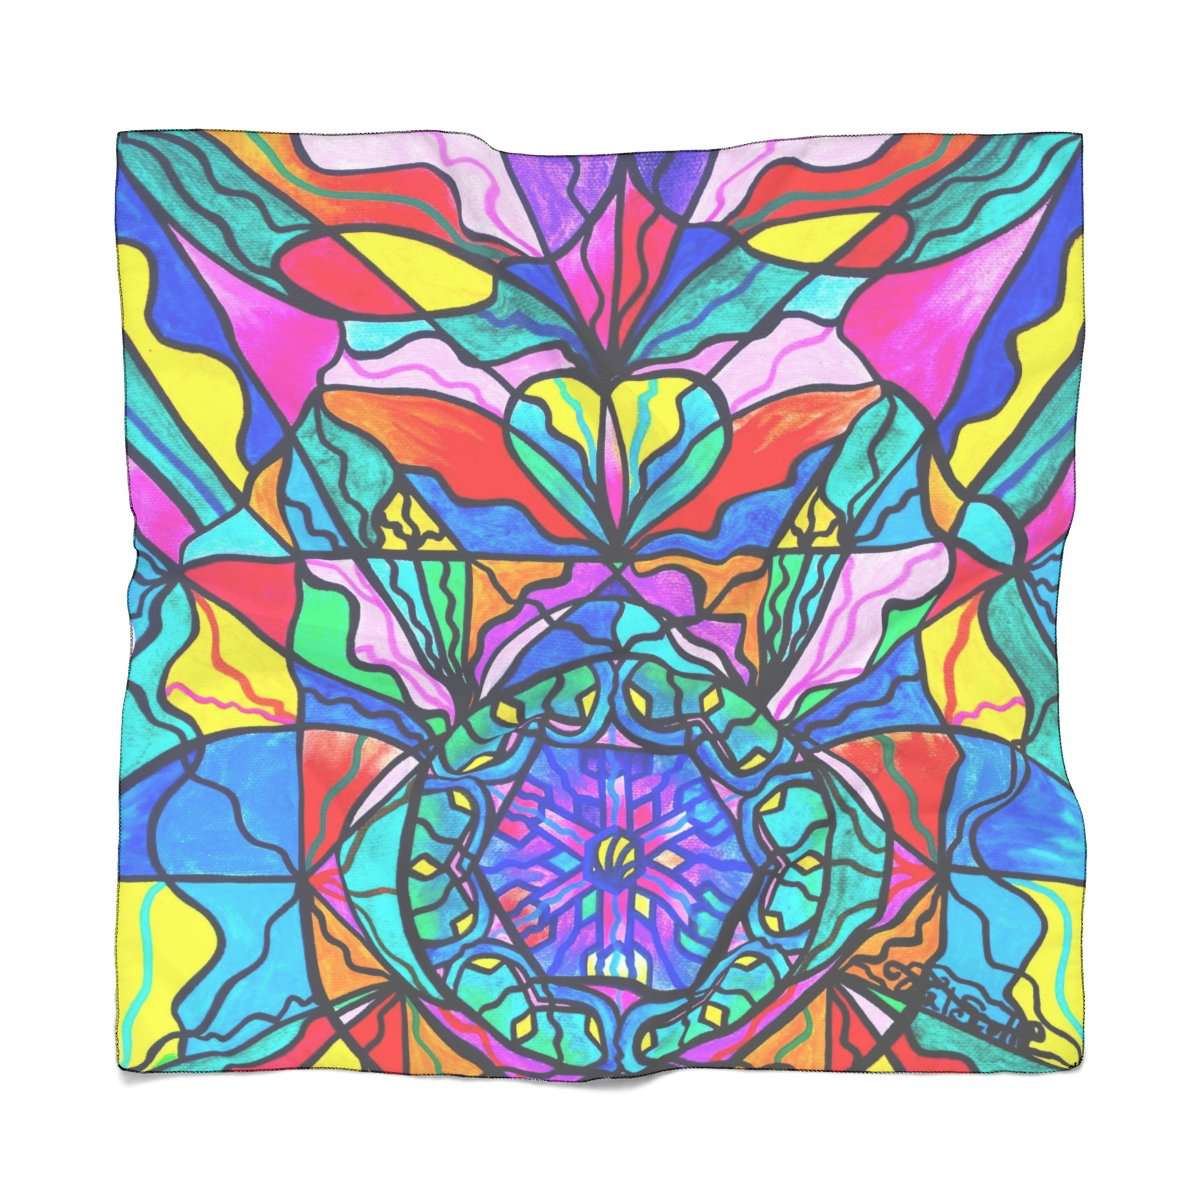 shop-without-worry-for-anahata-heart-chakra-frequency-scarf-online-hot-sale_2.jpg